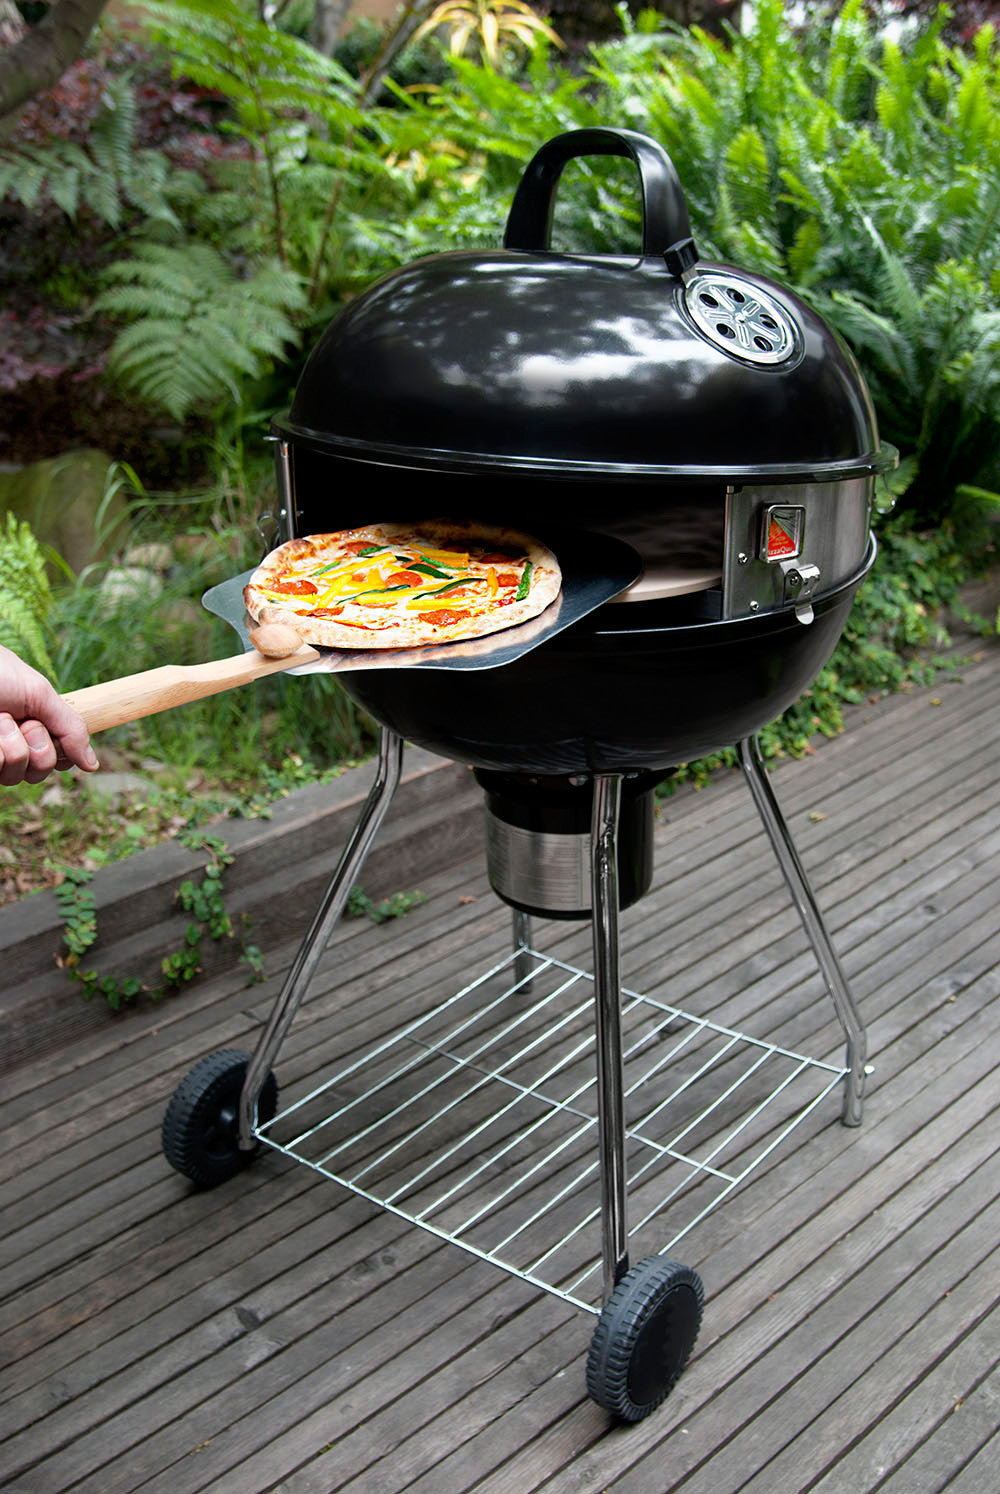 PizzaQue Pizza Kit for Kettle Grills